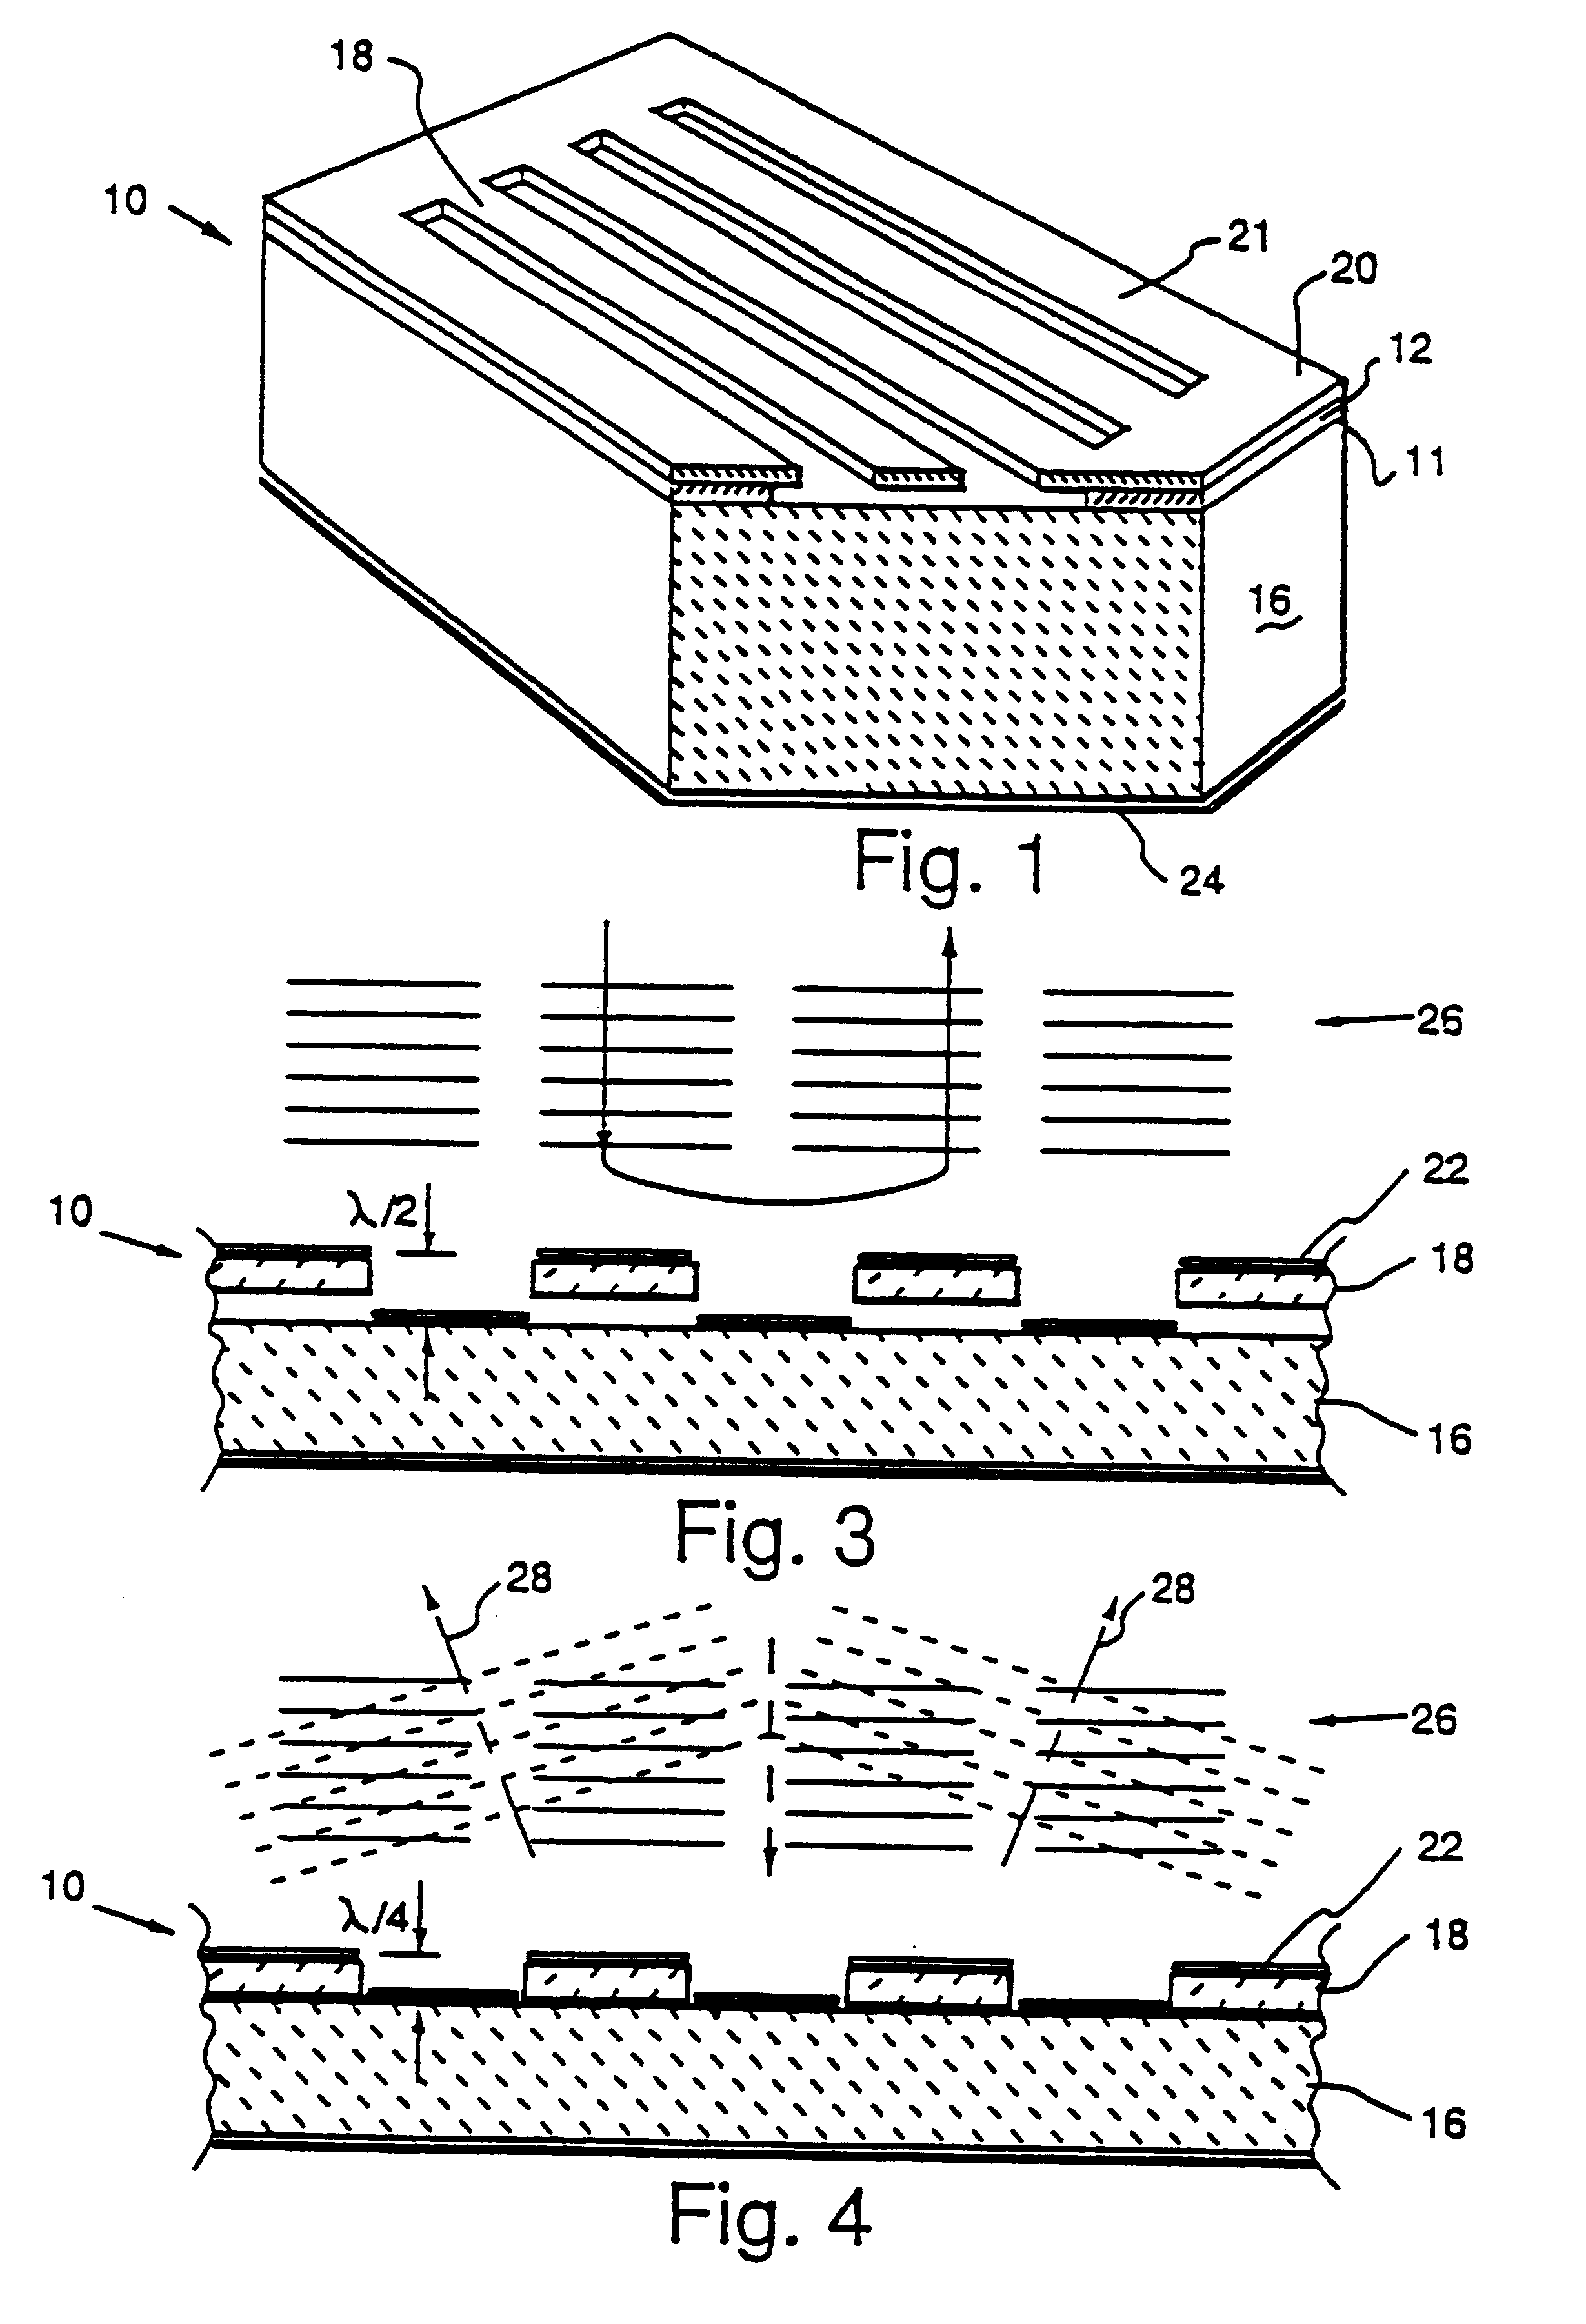 Method and apparatus for using an array of grating light valves to produce multicolor optical images